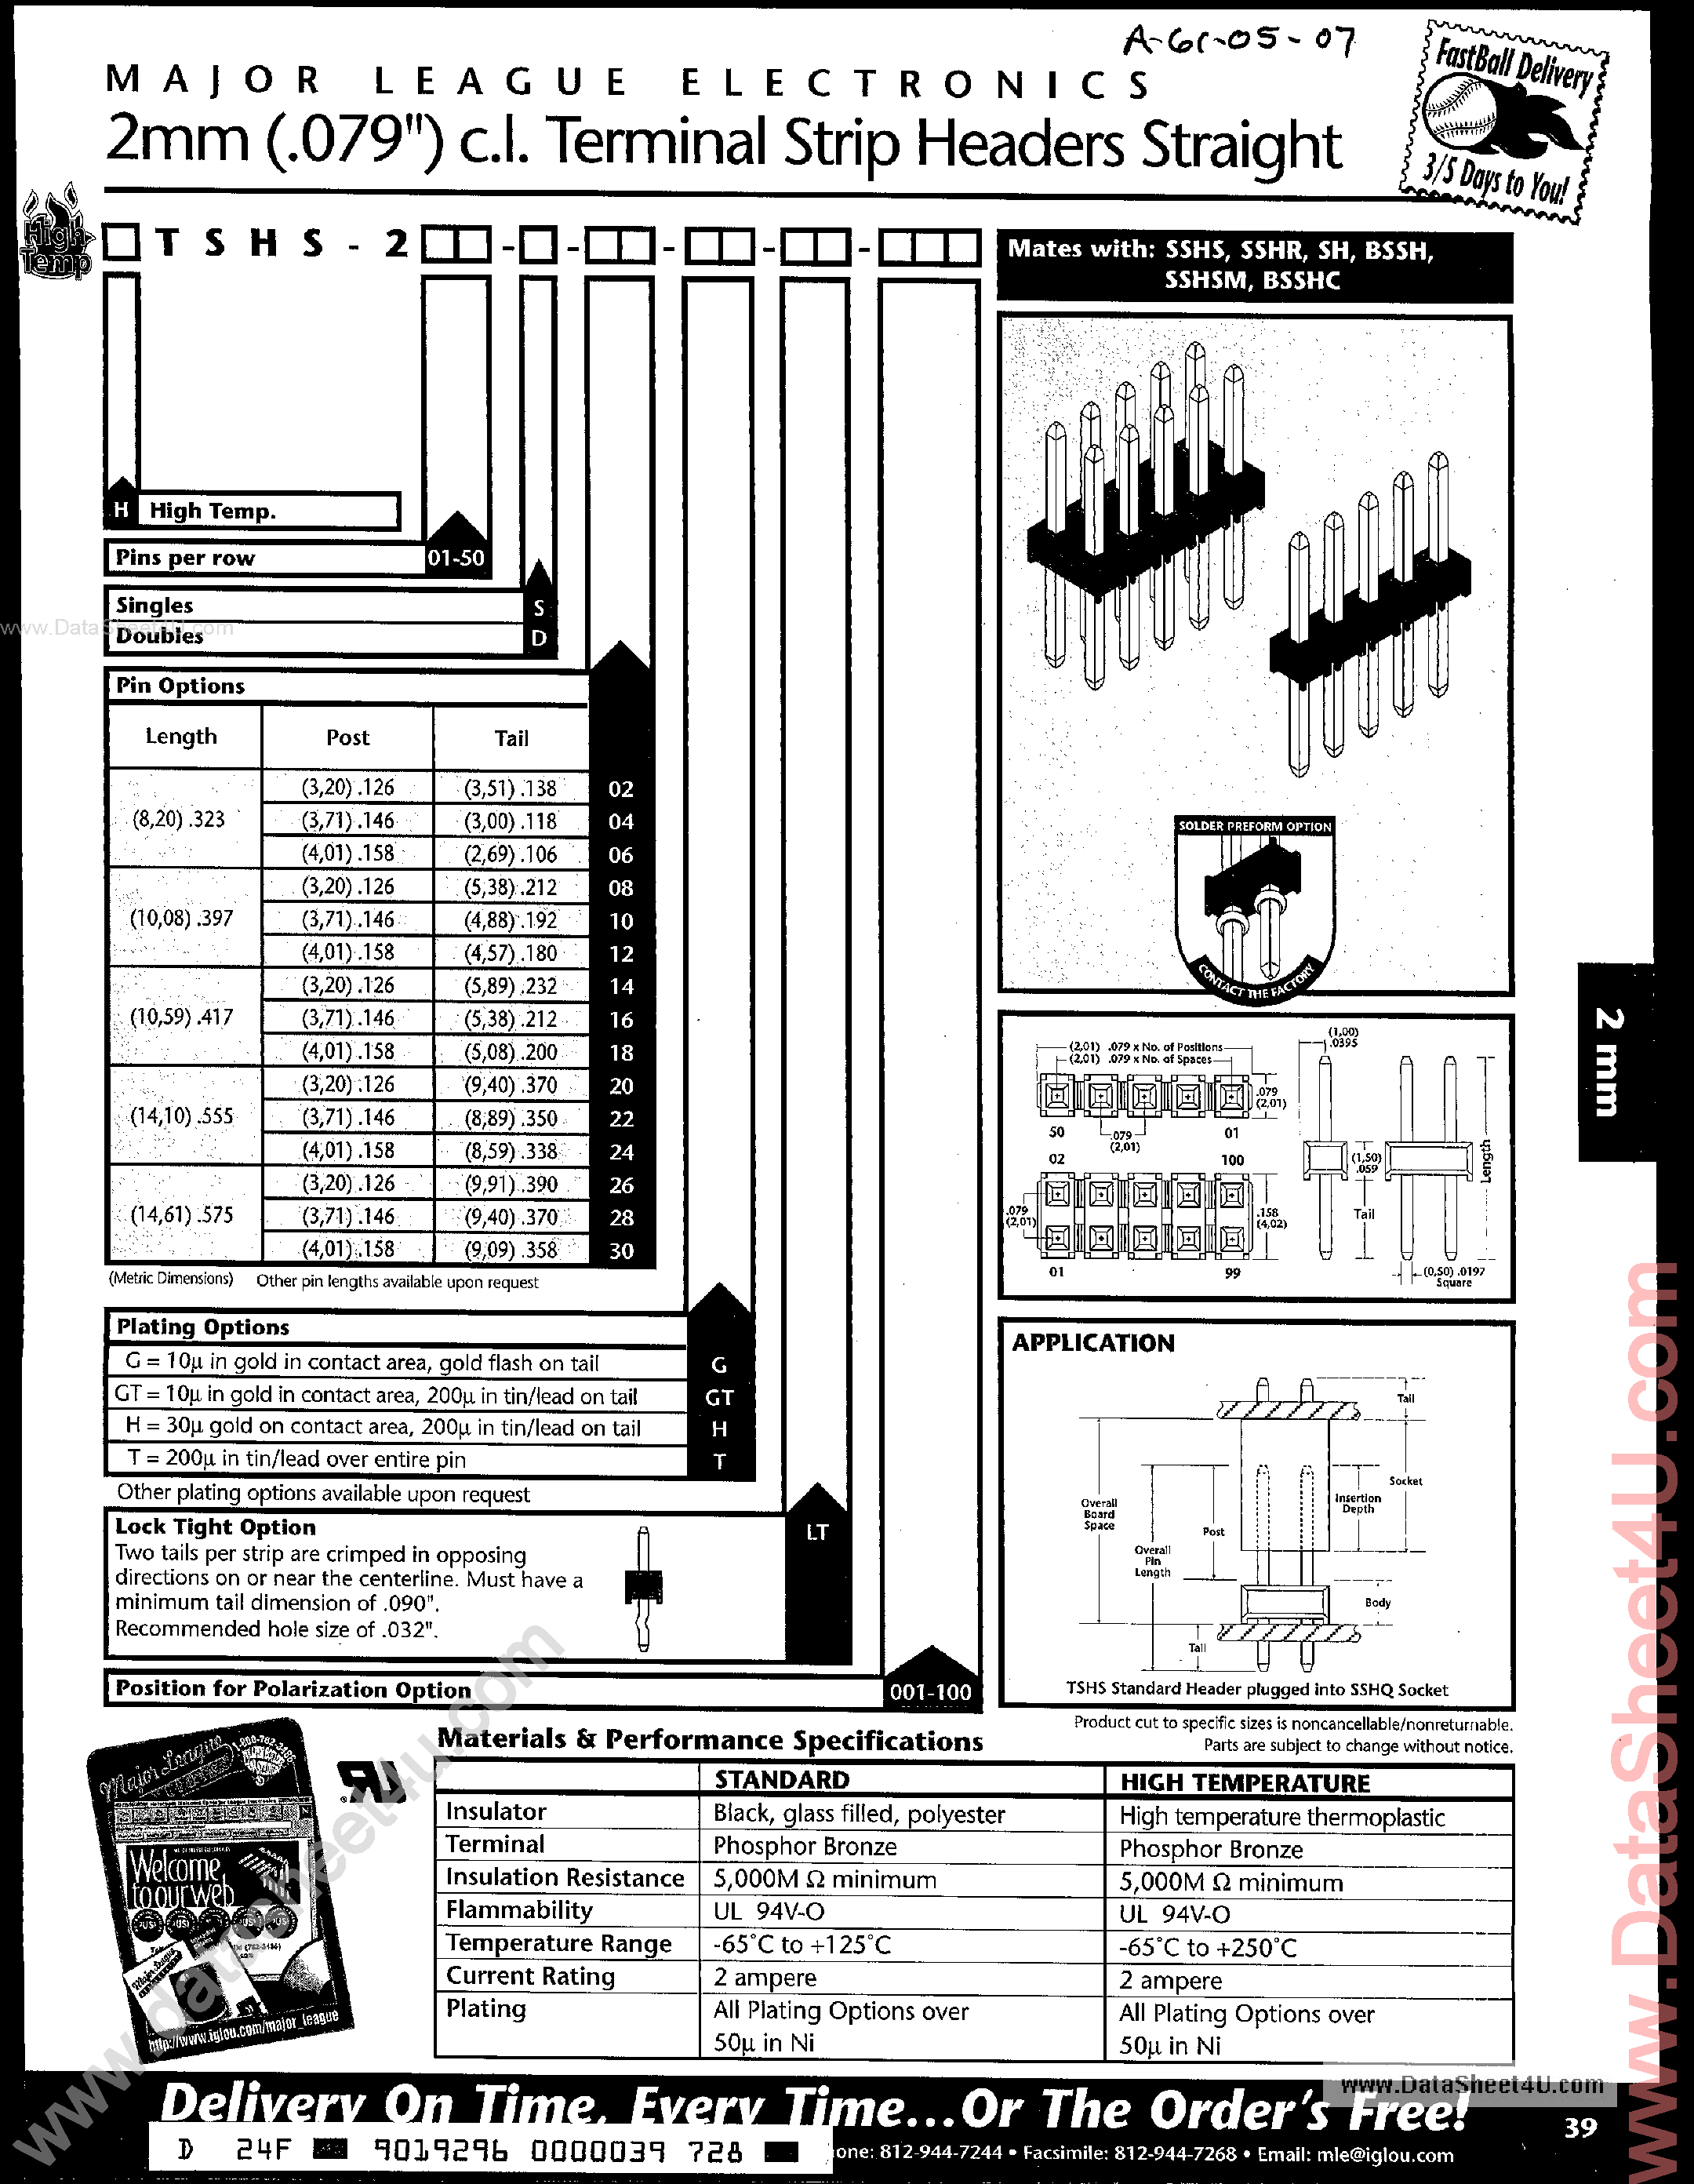 Datasheet 05-D-04-T - Search -----> TSHS-2 / BSSH-2 / SSHS-2 page 1